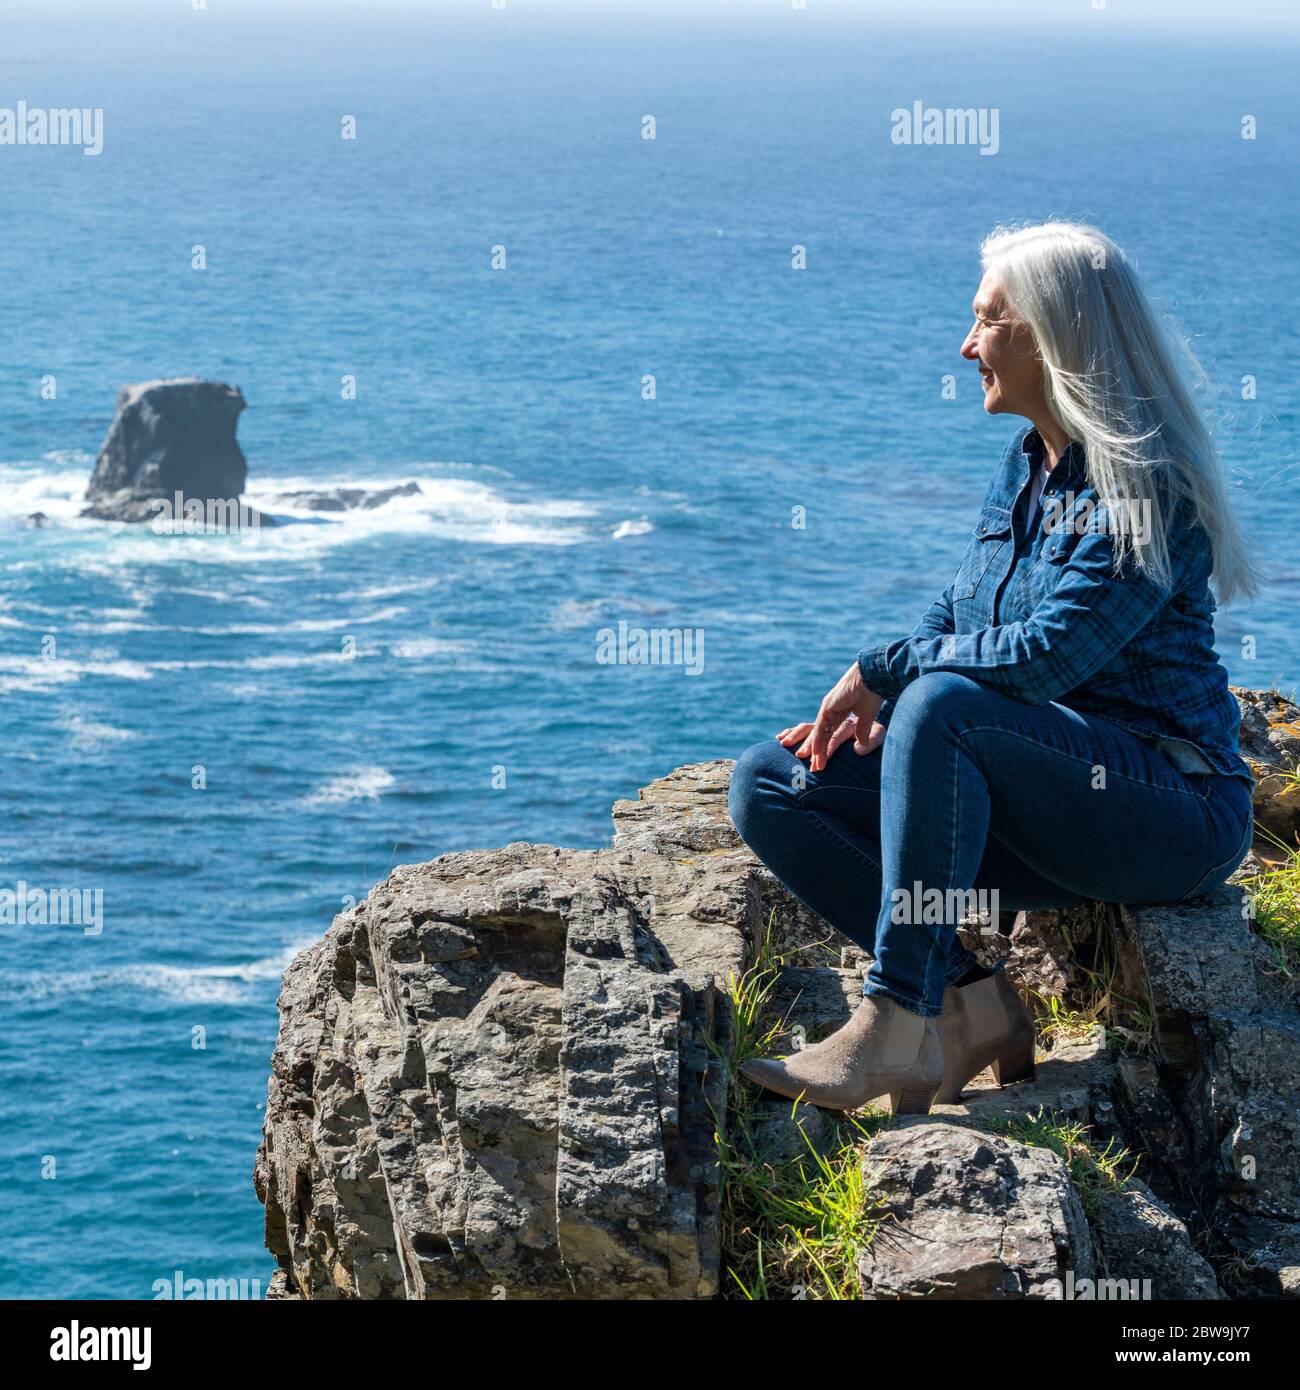 USA, California, Big Sur, Woman sitting at the edge of cliff looking at view Stock Photo